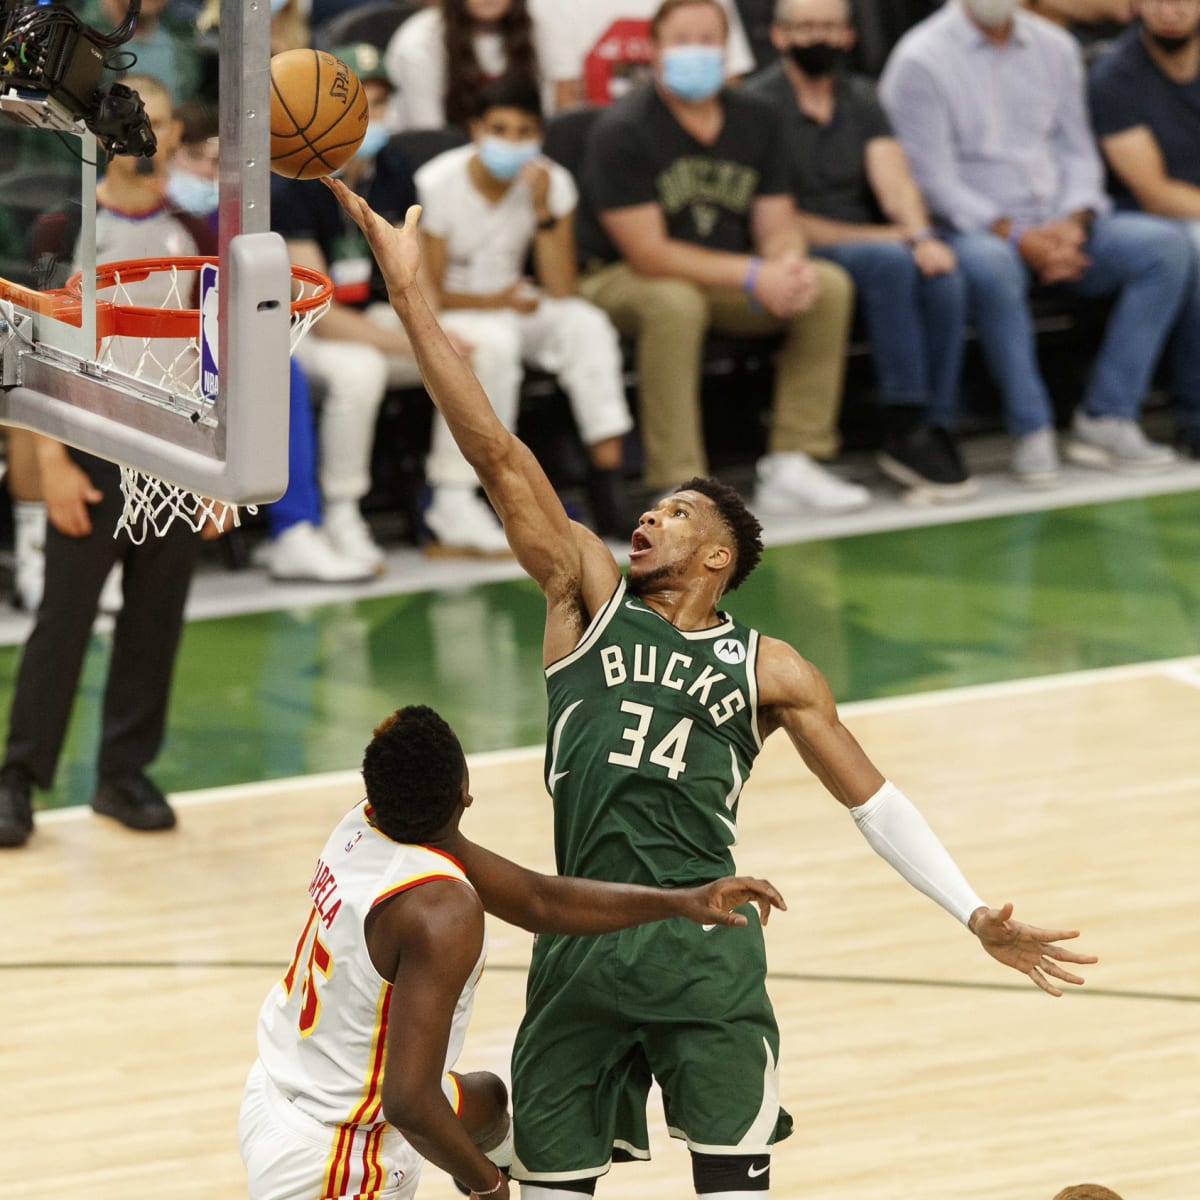 Bucks Beat Hawks and Advance to the N.B.A. Finals - The New York Times